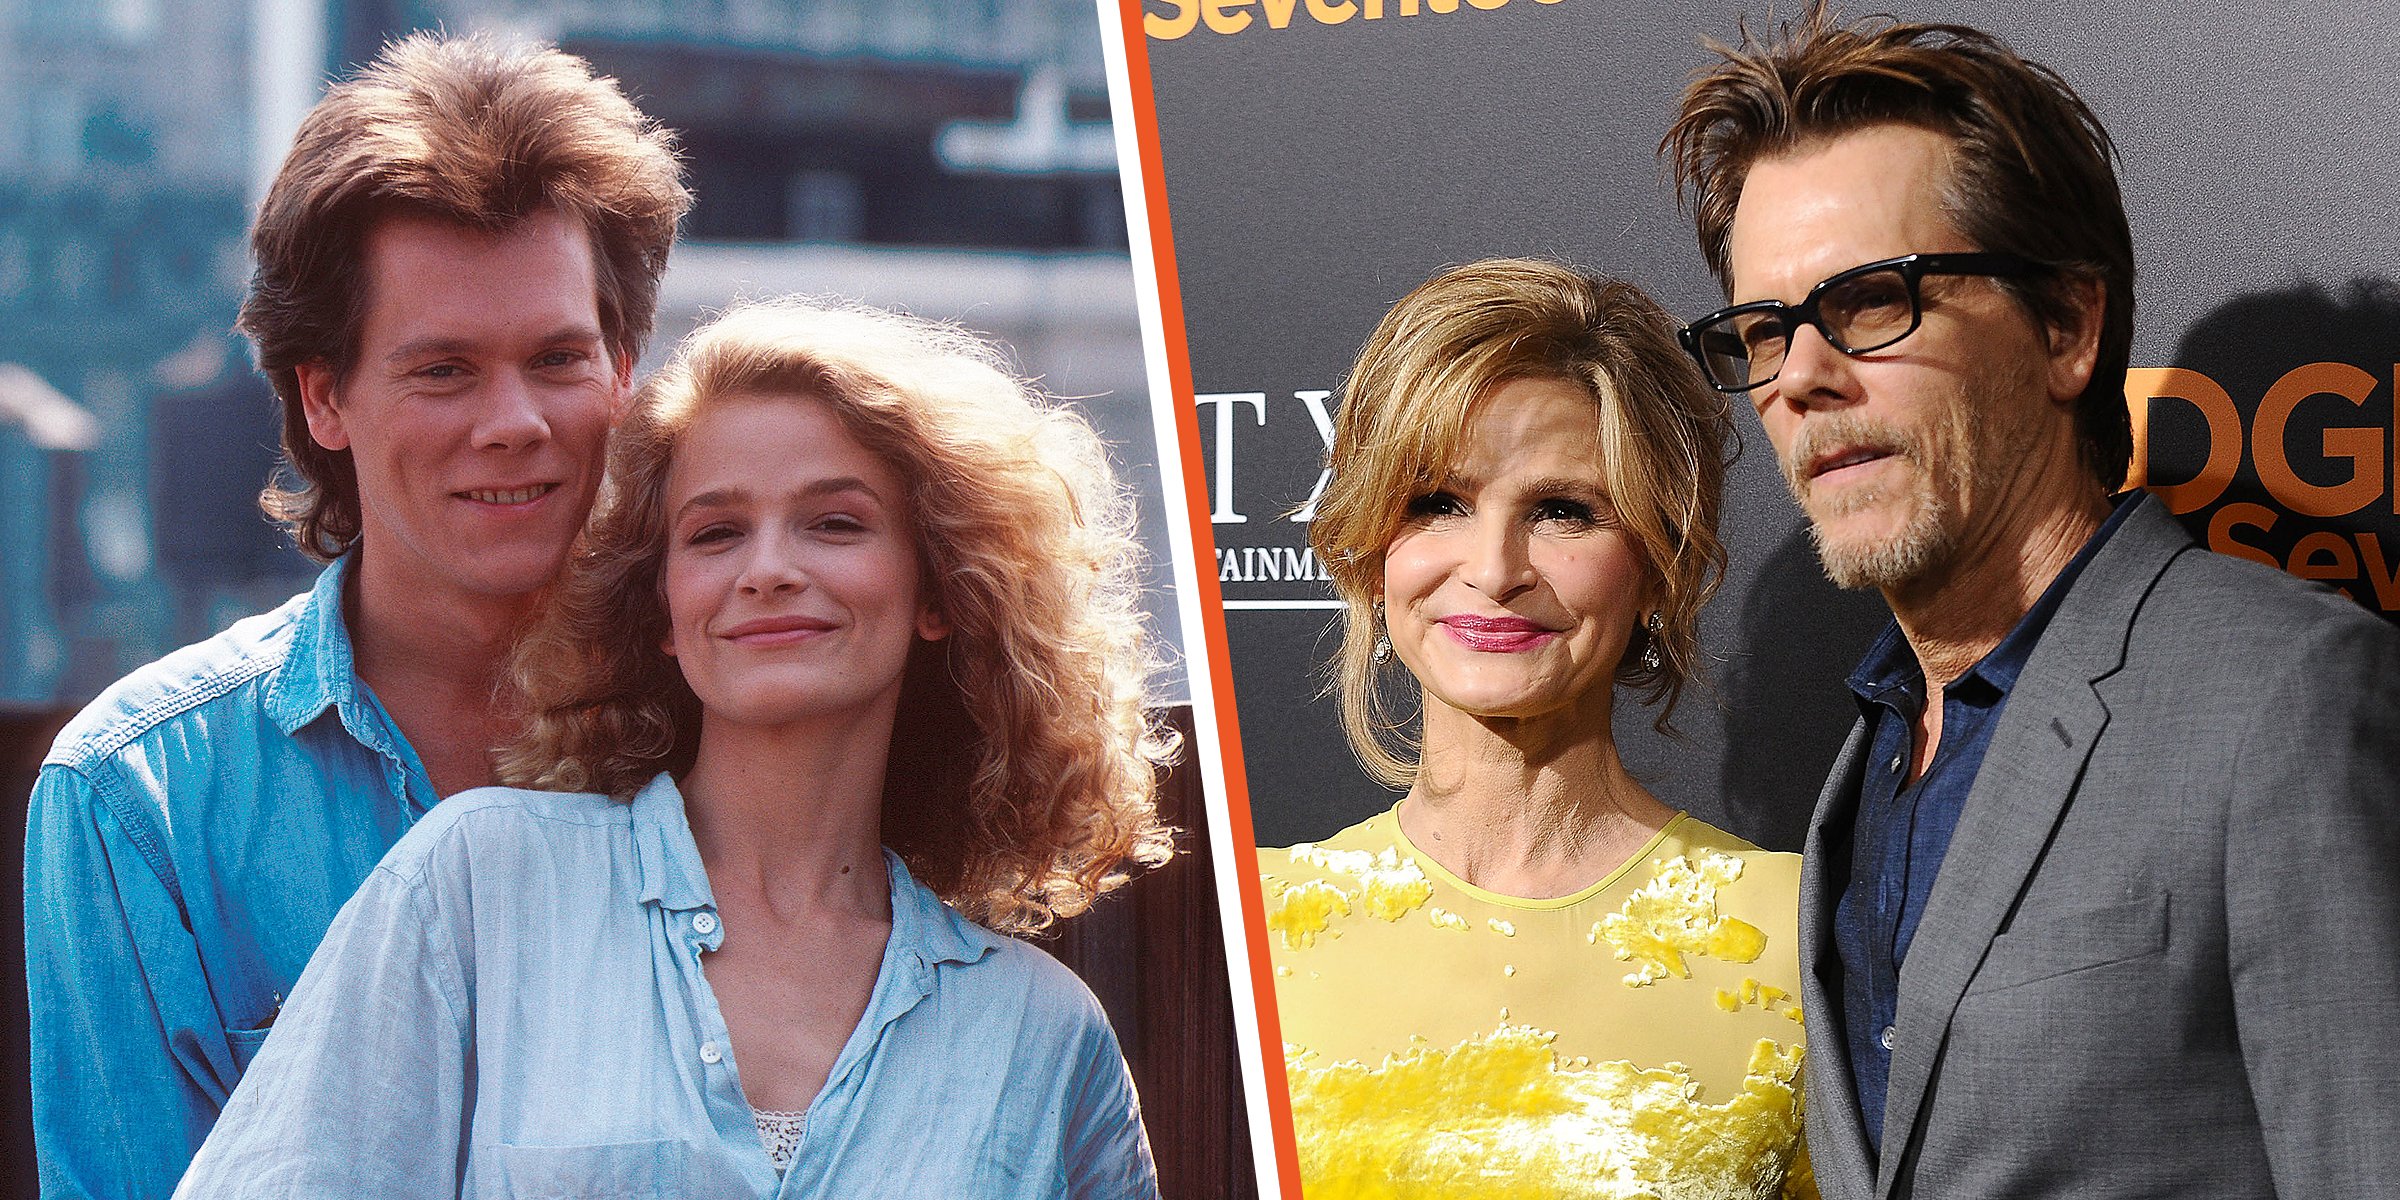 Inside Cousins Kevin Bacon & Kyra Sedgwick's LA Home Where They Live With Their Son for the Last 10 Years